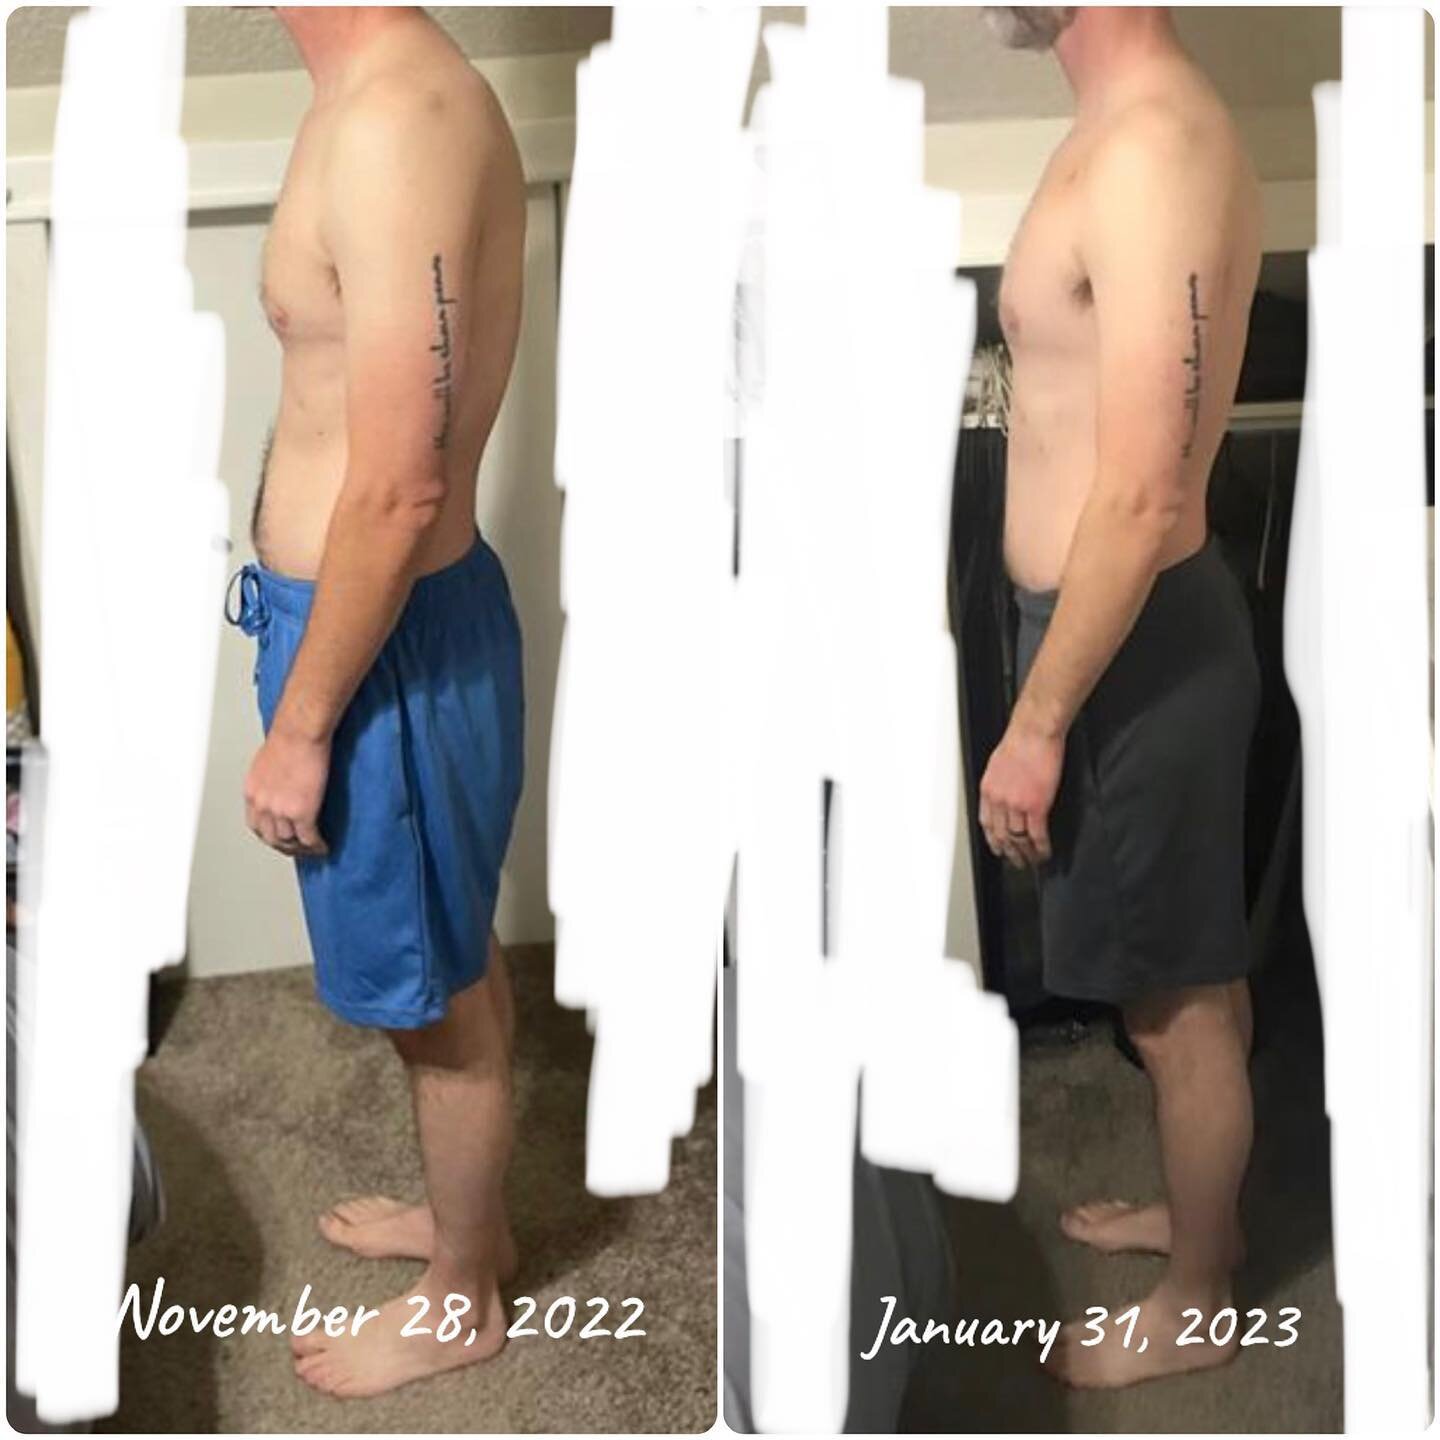 Client spotlight!!
We have been working together for about 2 months in these photos! 

Weight: 165lbs in left side photos, 170lbs in right side photos. 

One of our goals was to gain about 5lbs by April, but it happened much faster than that. 

What 